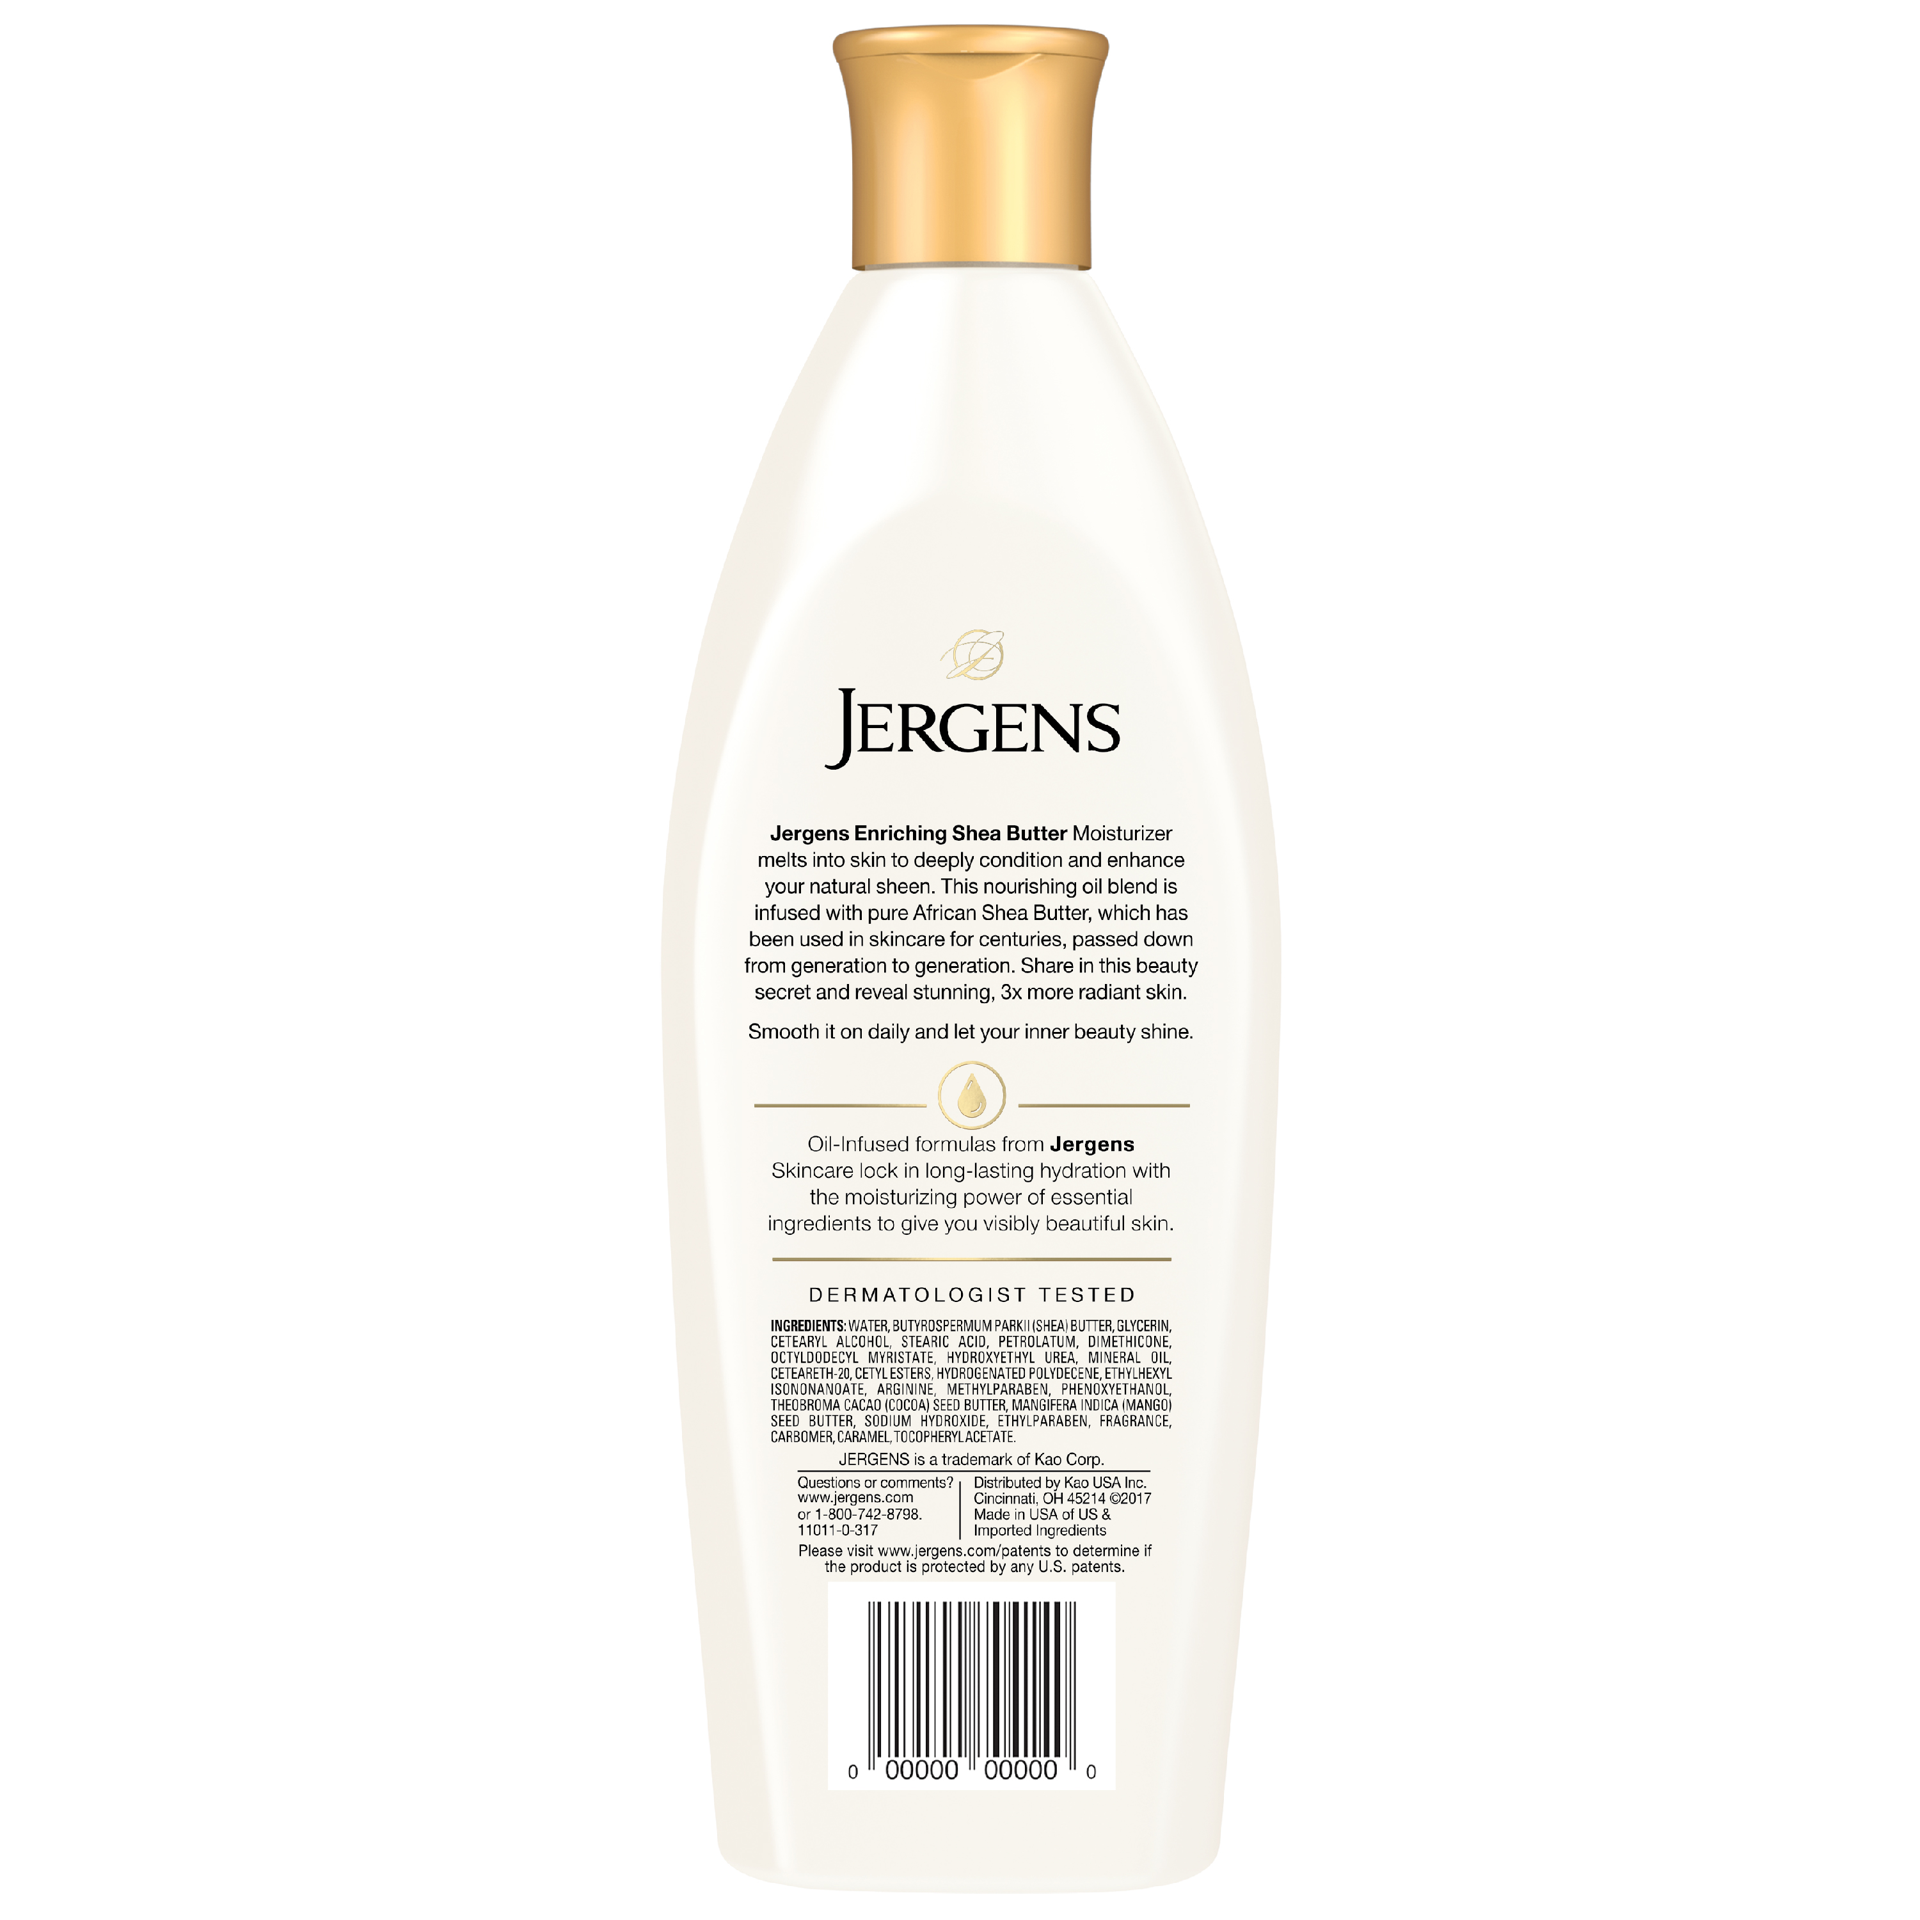 slide 5 of 5, Jergens Shea Butter Deep Conditioning Moisturizer, 8 Ounces, 3X More Radiant Skin, with Pure Shea Butter, Dermatologist Tested, 8 fl oz